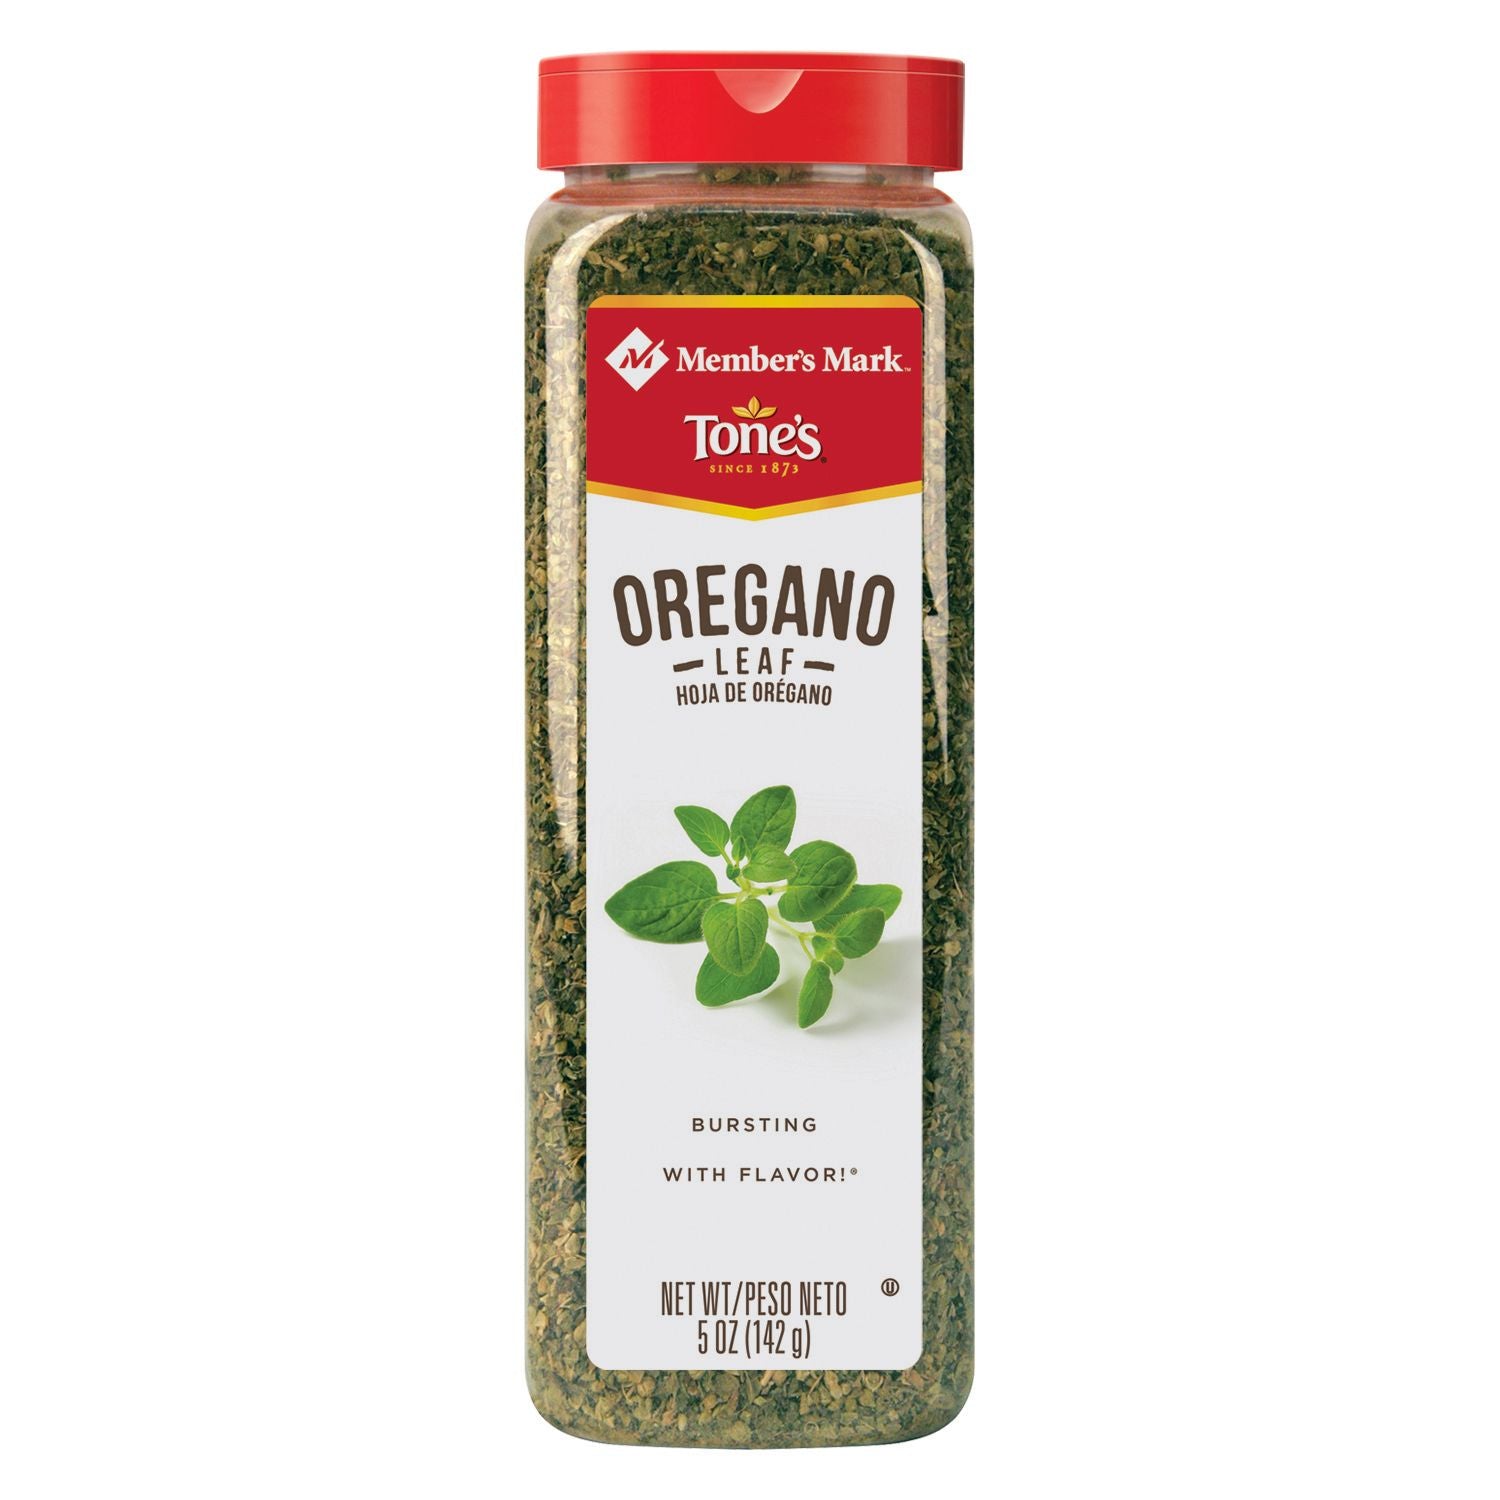 Save on Lawry's Oregano Leaves Order Online Delivery